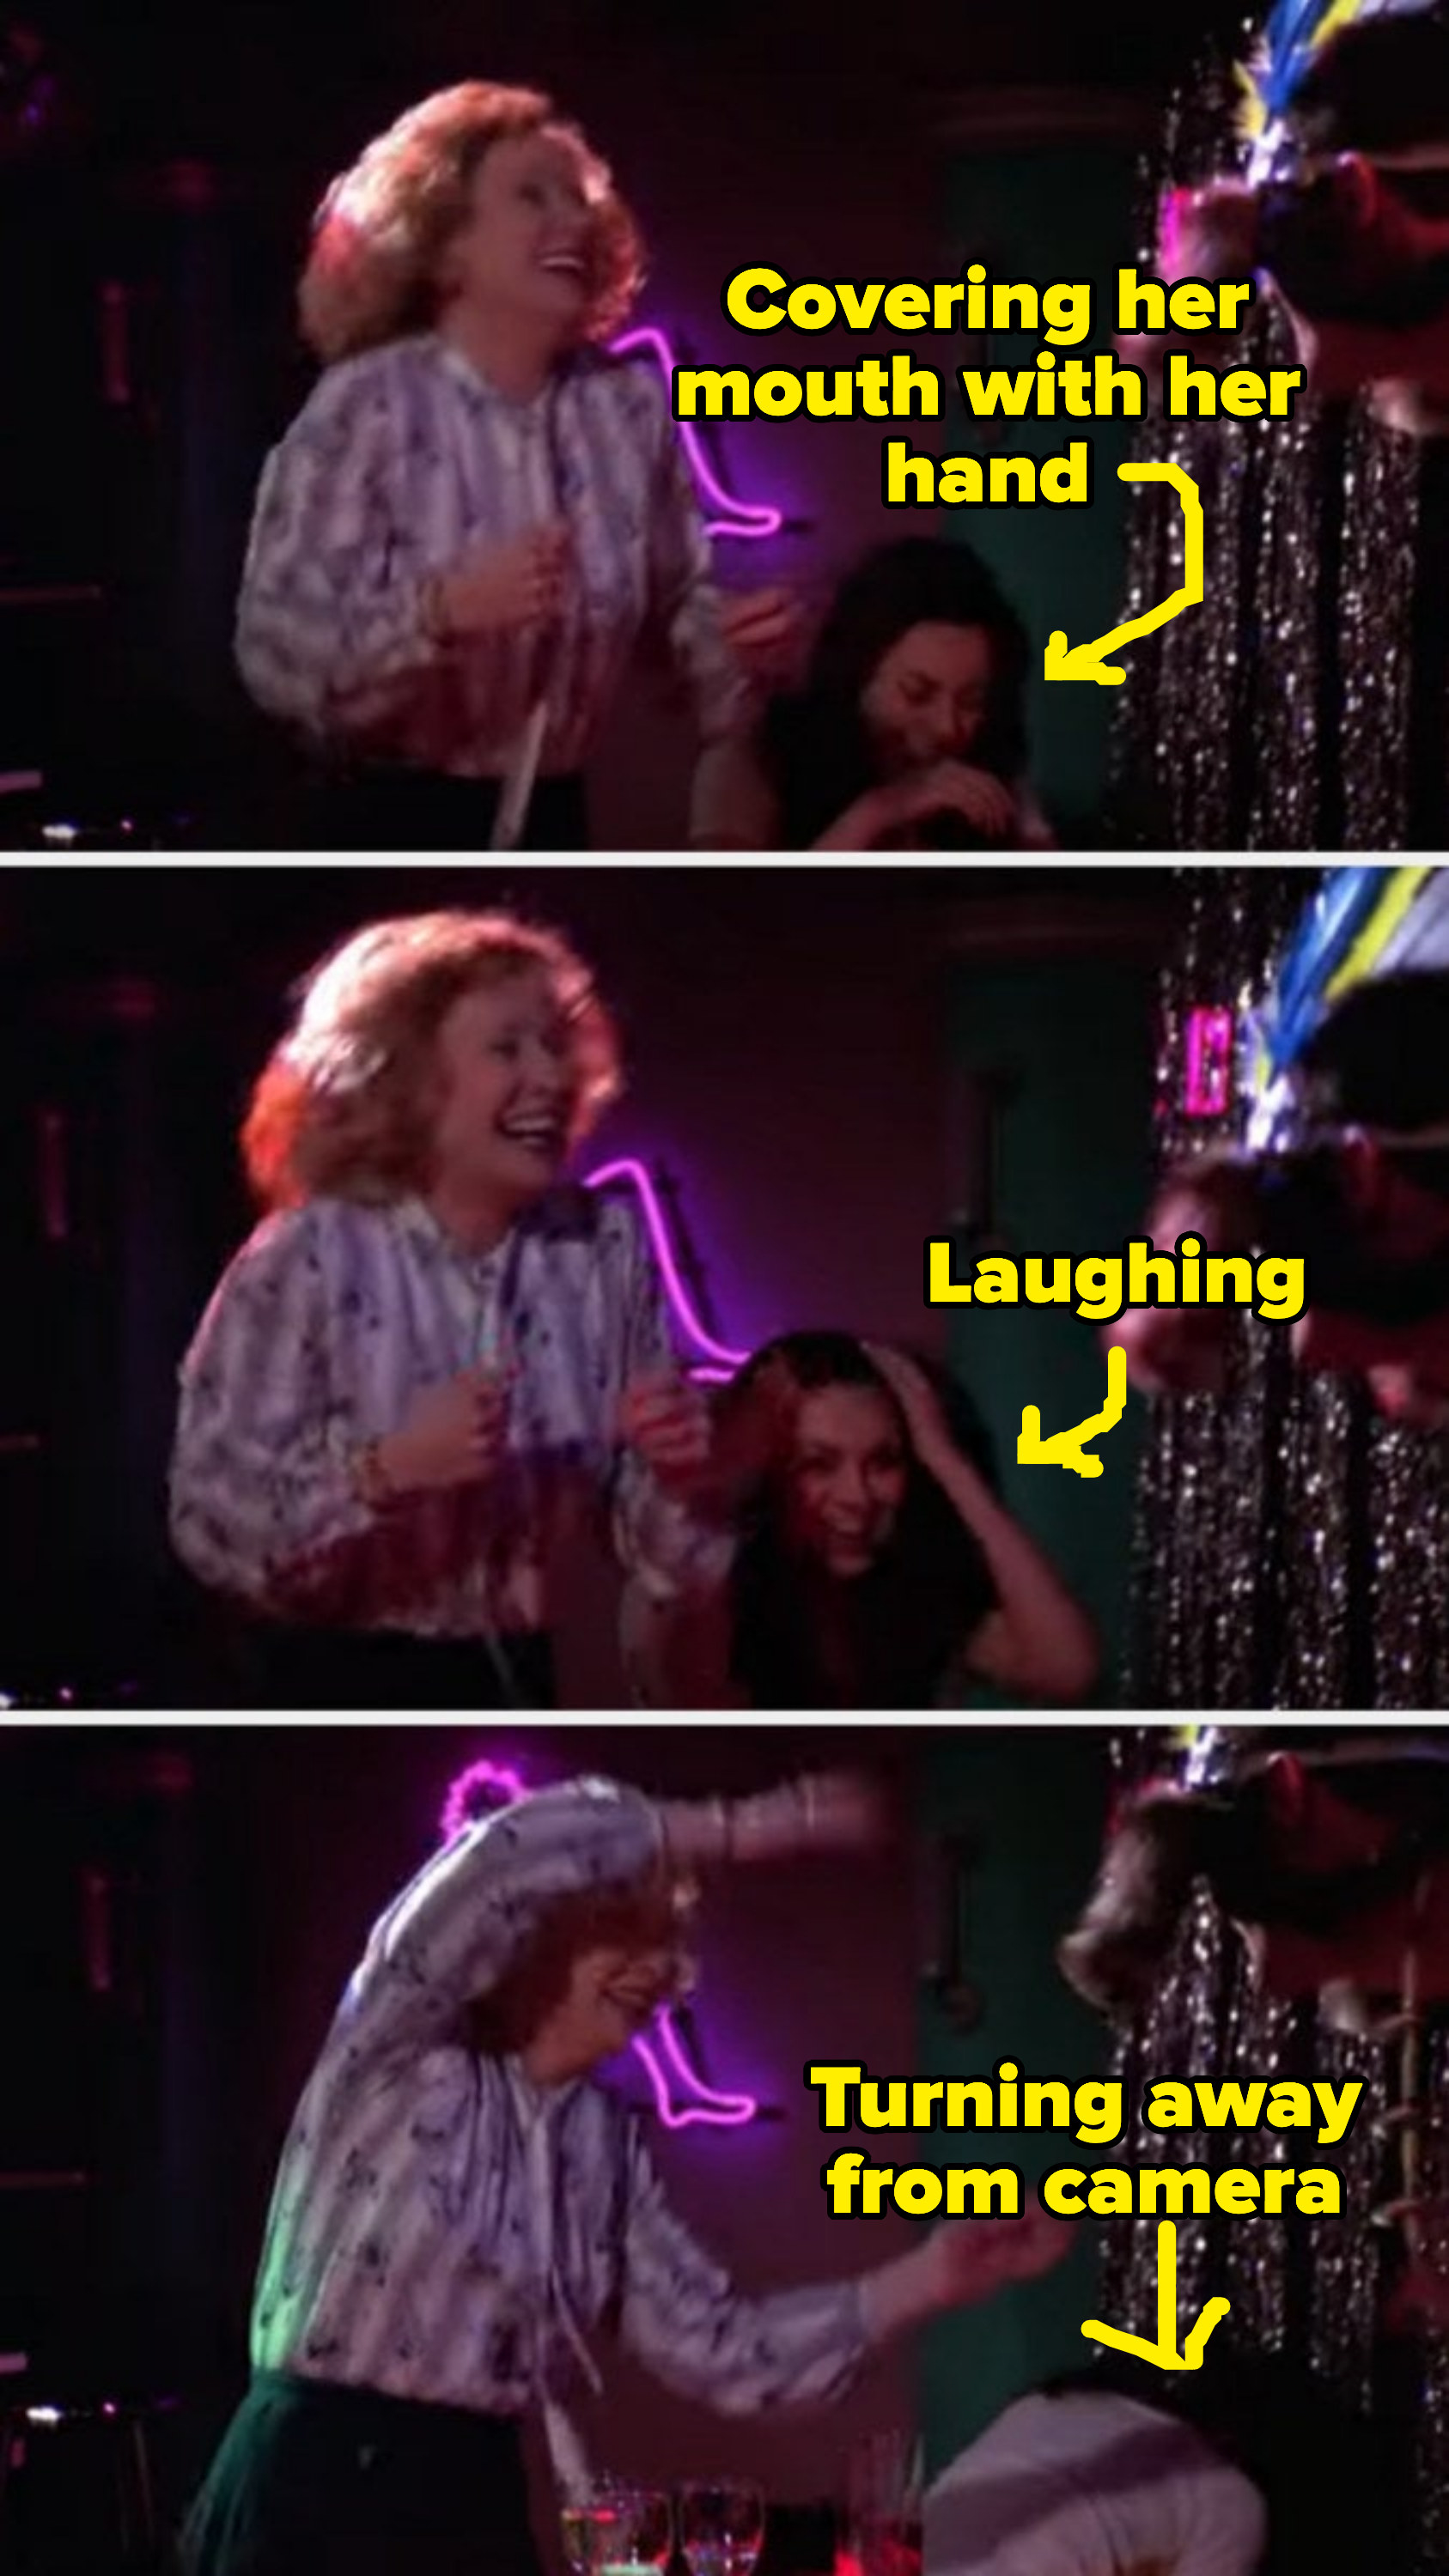 Three different shots where Mila Kunis starts laughing, then covers her mouth with her hand, then turns away from the camera